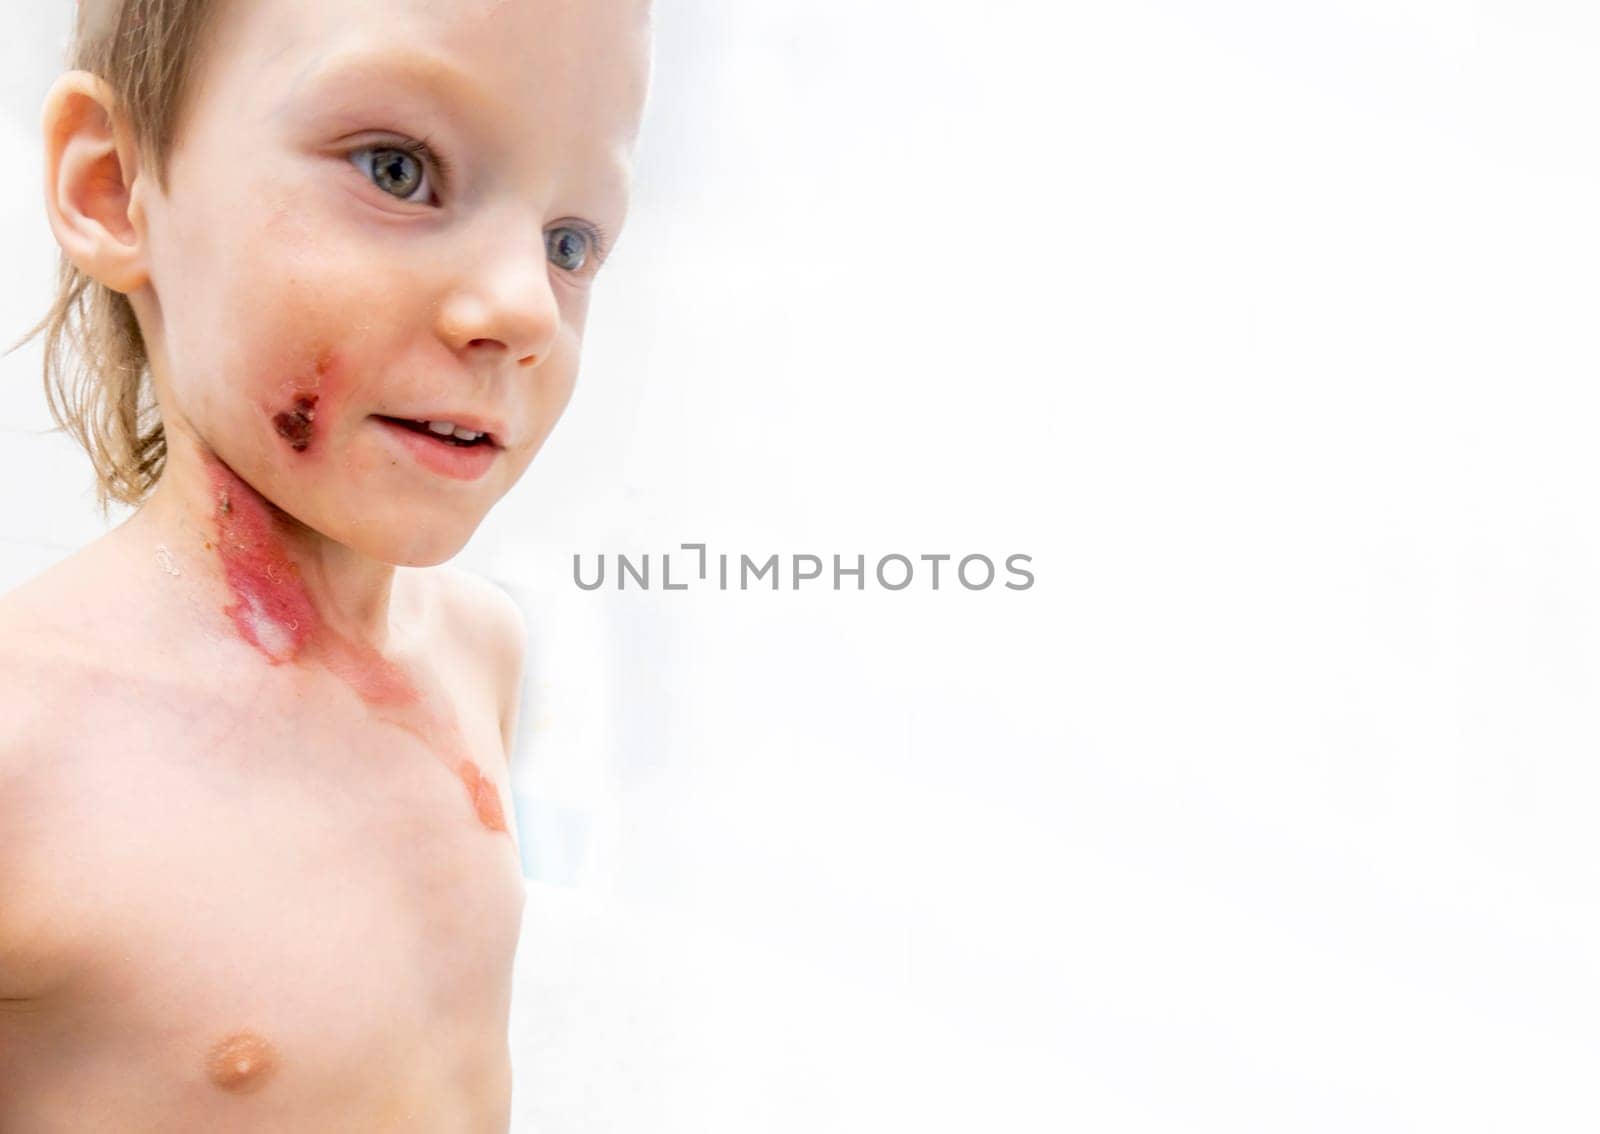 medical procedure dressing a boy with a first-degree burn from boiling water on his face, neck and chest